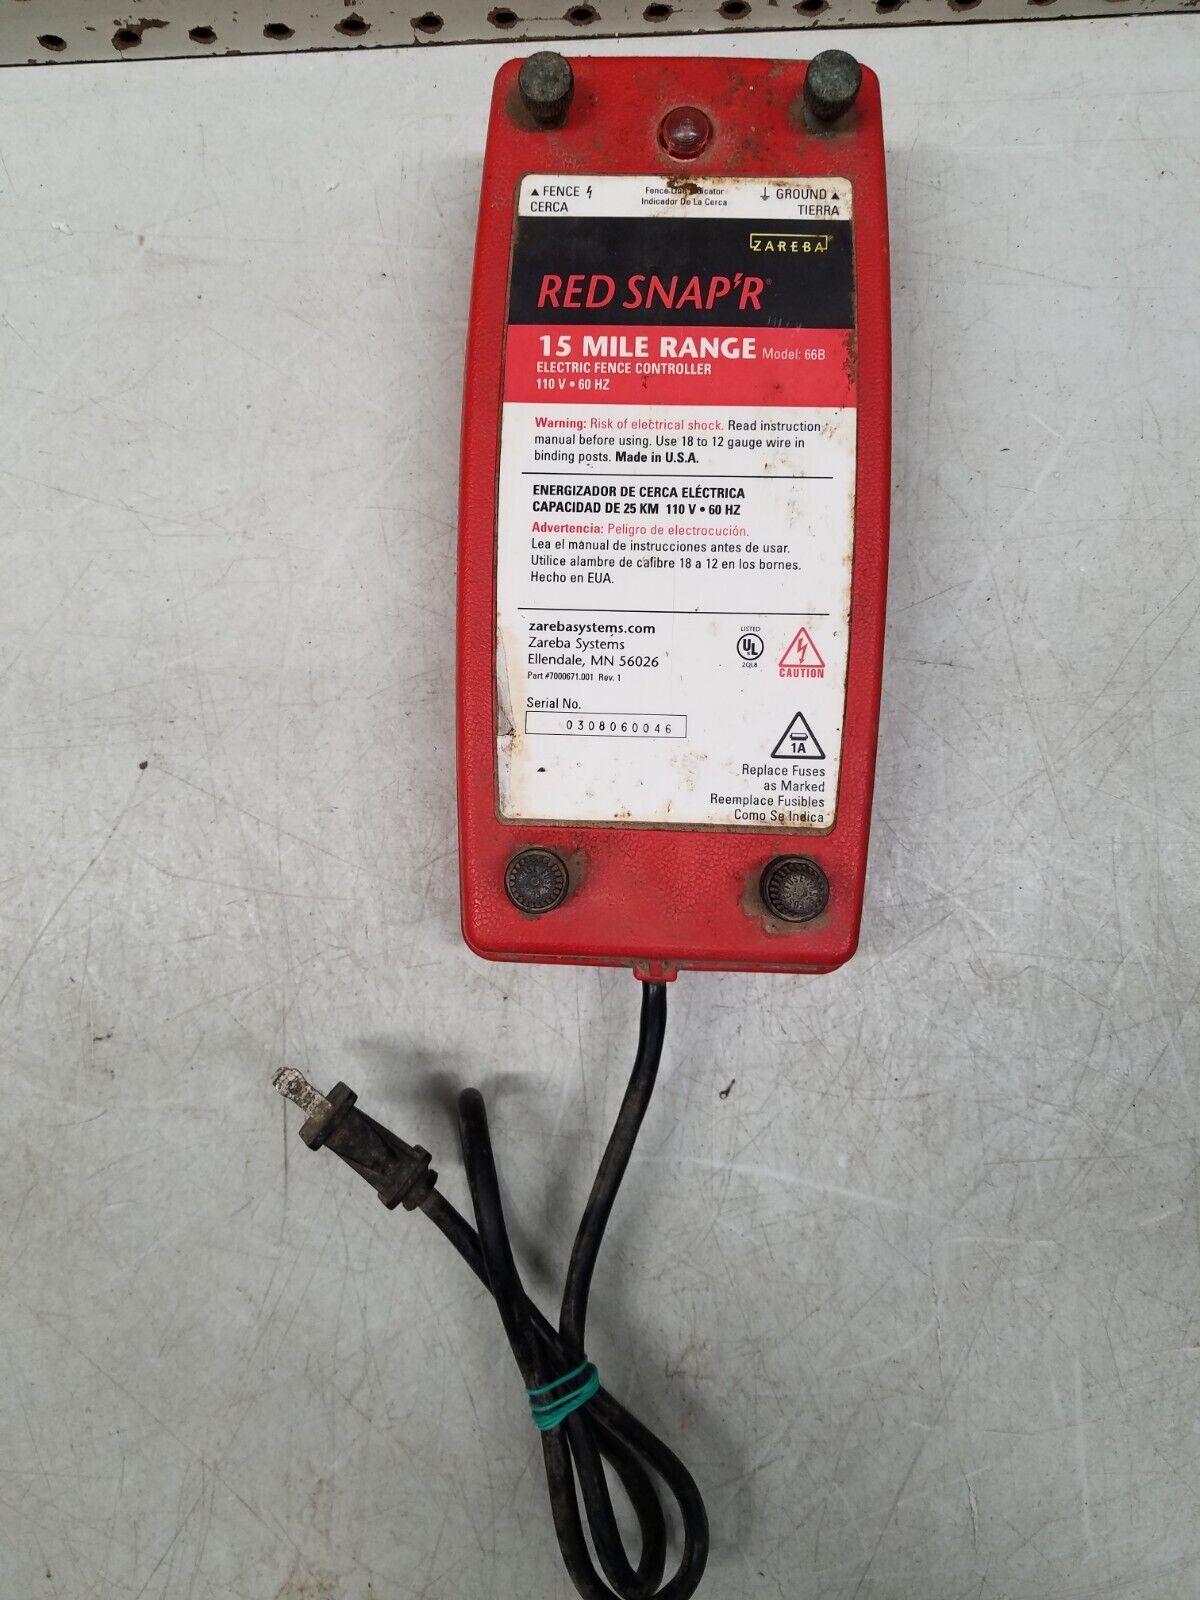 Red Snap’r  66b - Electric Fence Controller 15 Mile Range Untested